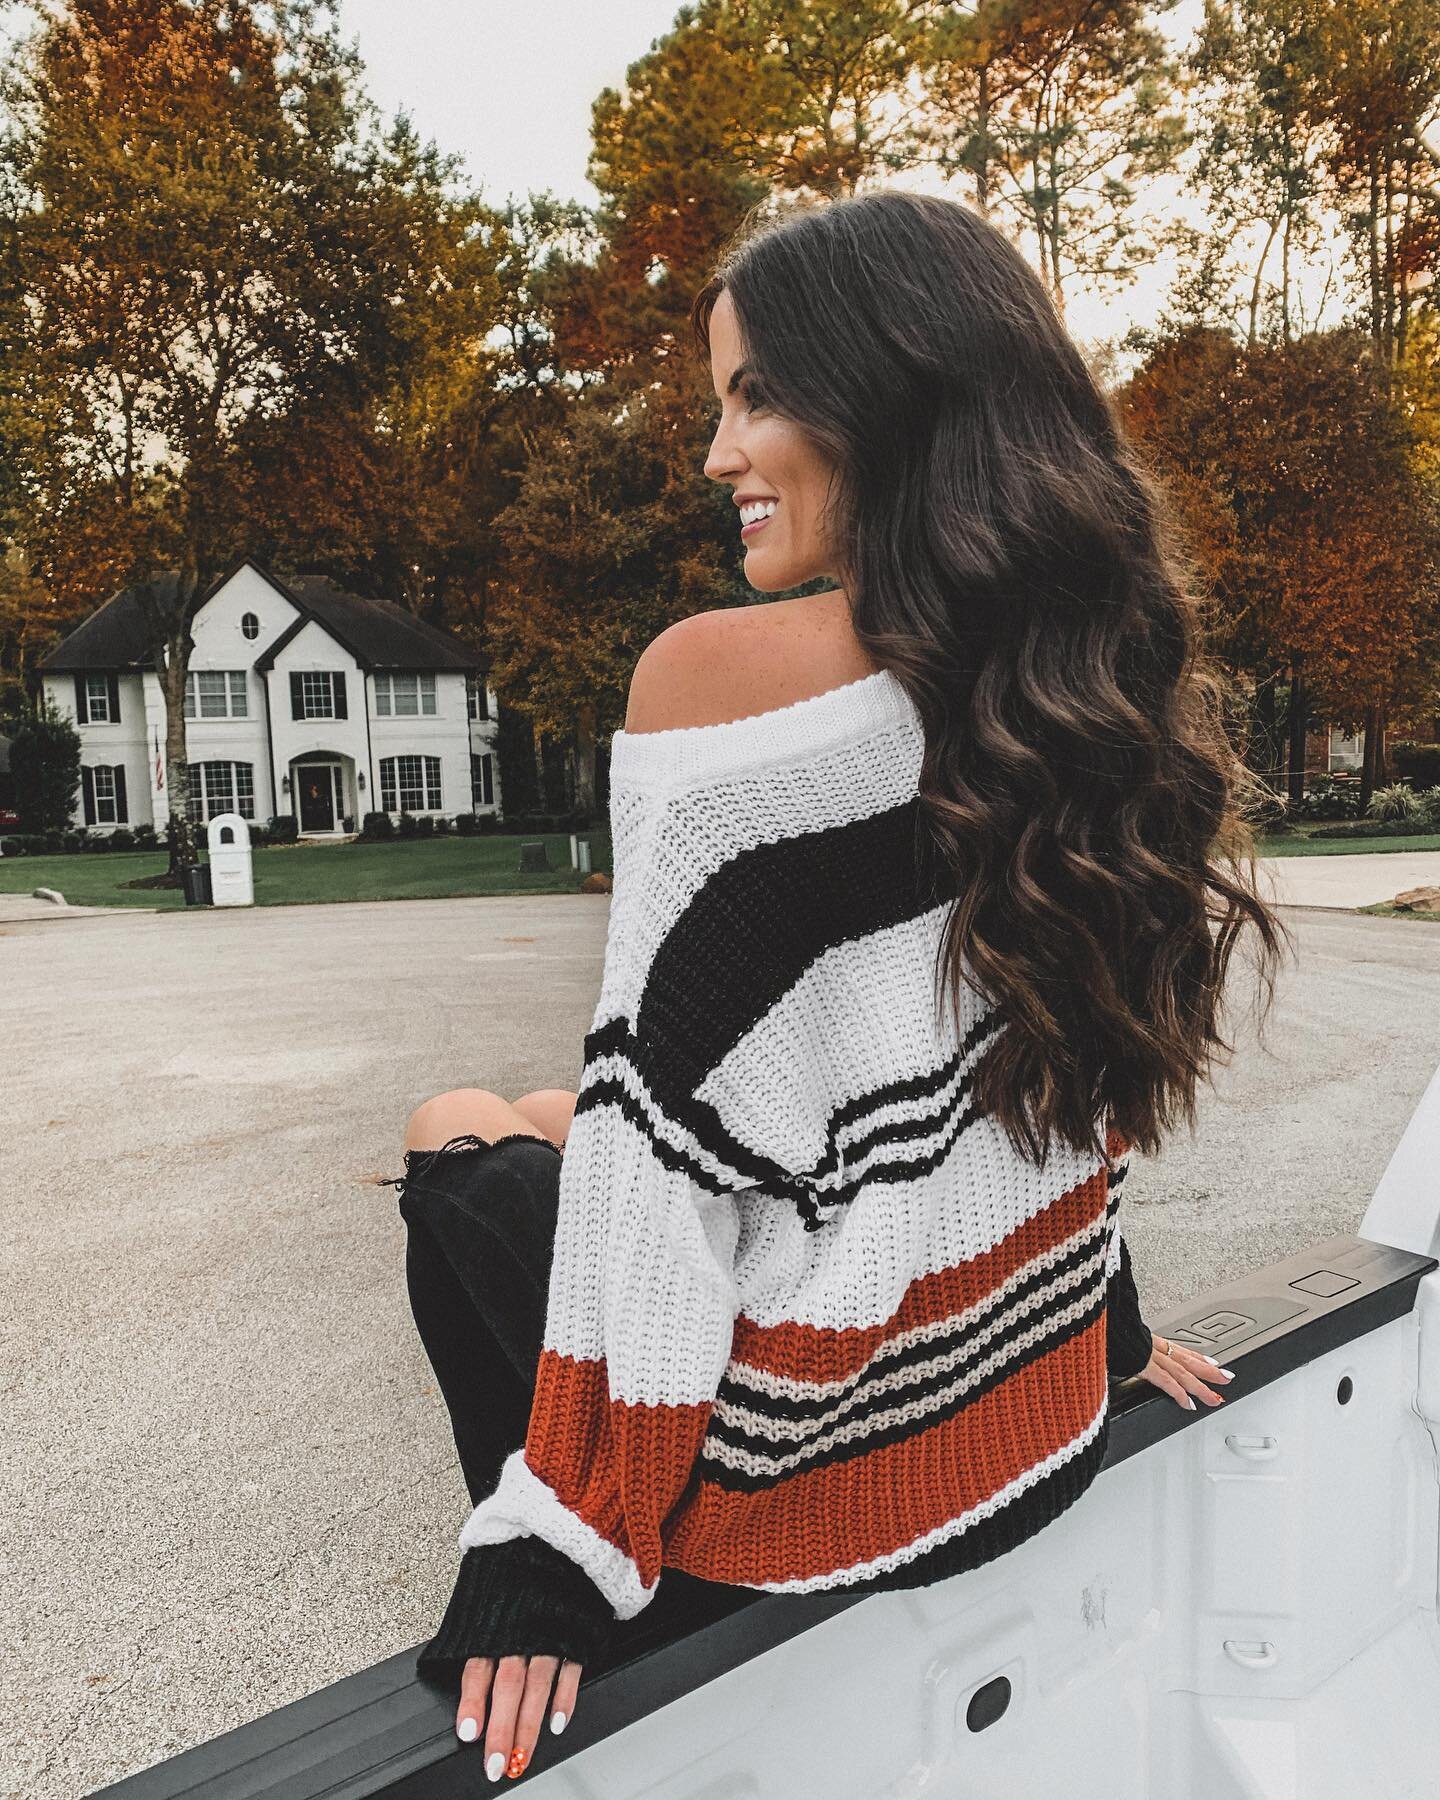 First signs of fall in Houston! Jk, fall photoshopped😬🍂🍁 It&rsquo;ll be pretty come December, though. Sweater is Amazon &amp; linked🧡 http://liketk.it/3ovIt #fallstyle #fall